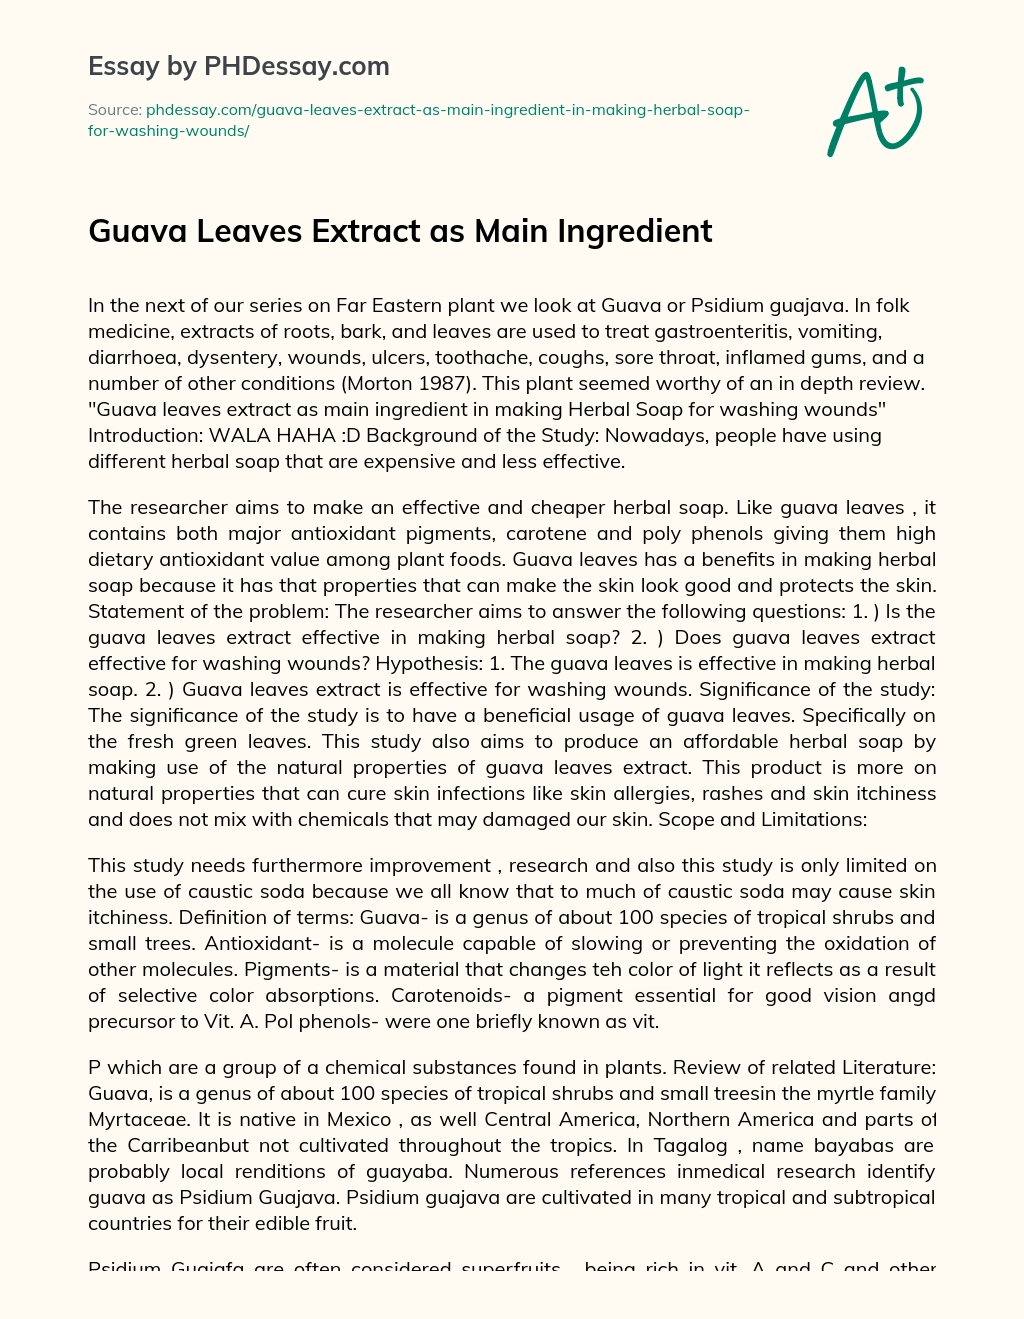 Guava Leaves Extract as Main Ingredient essay